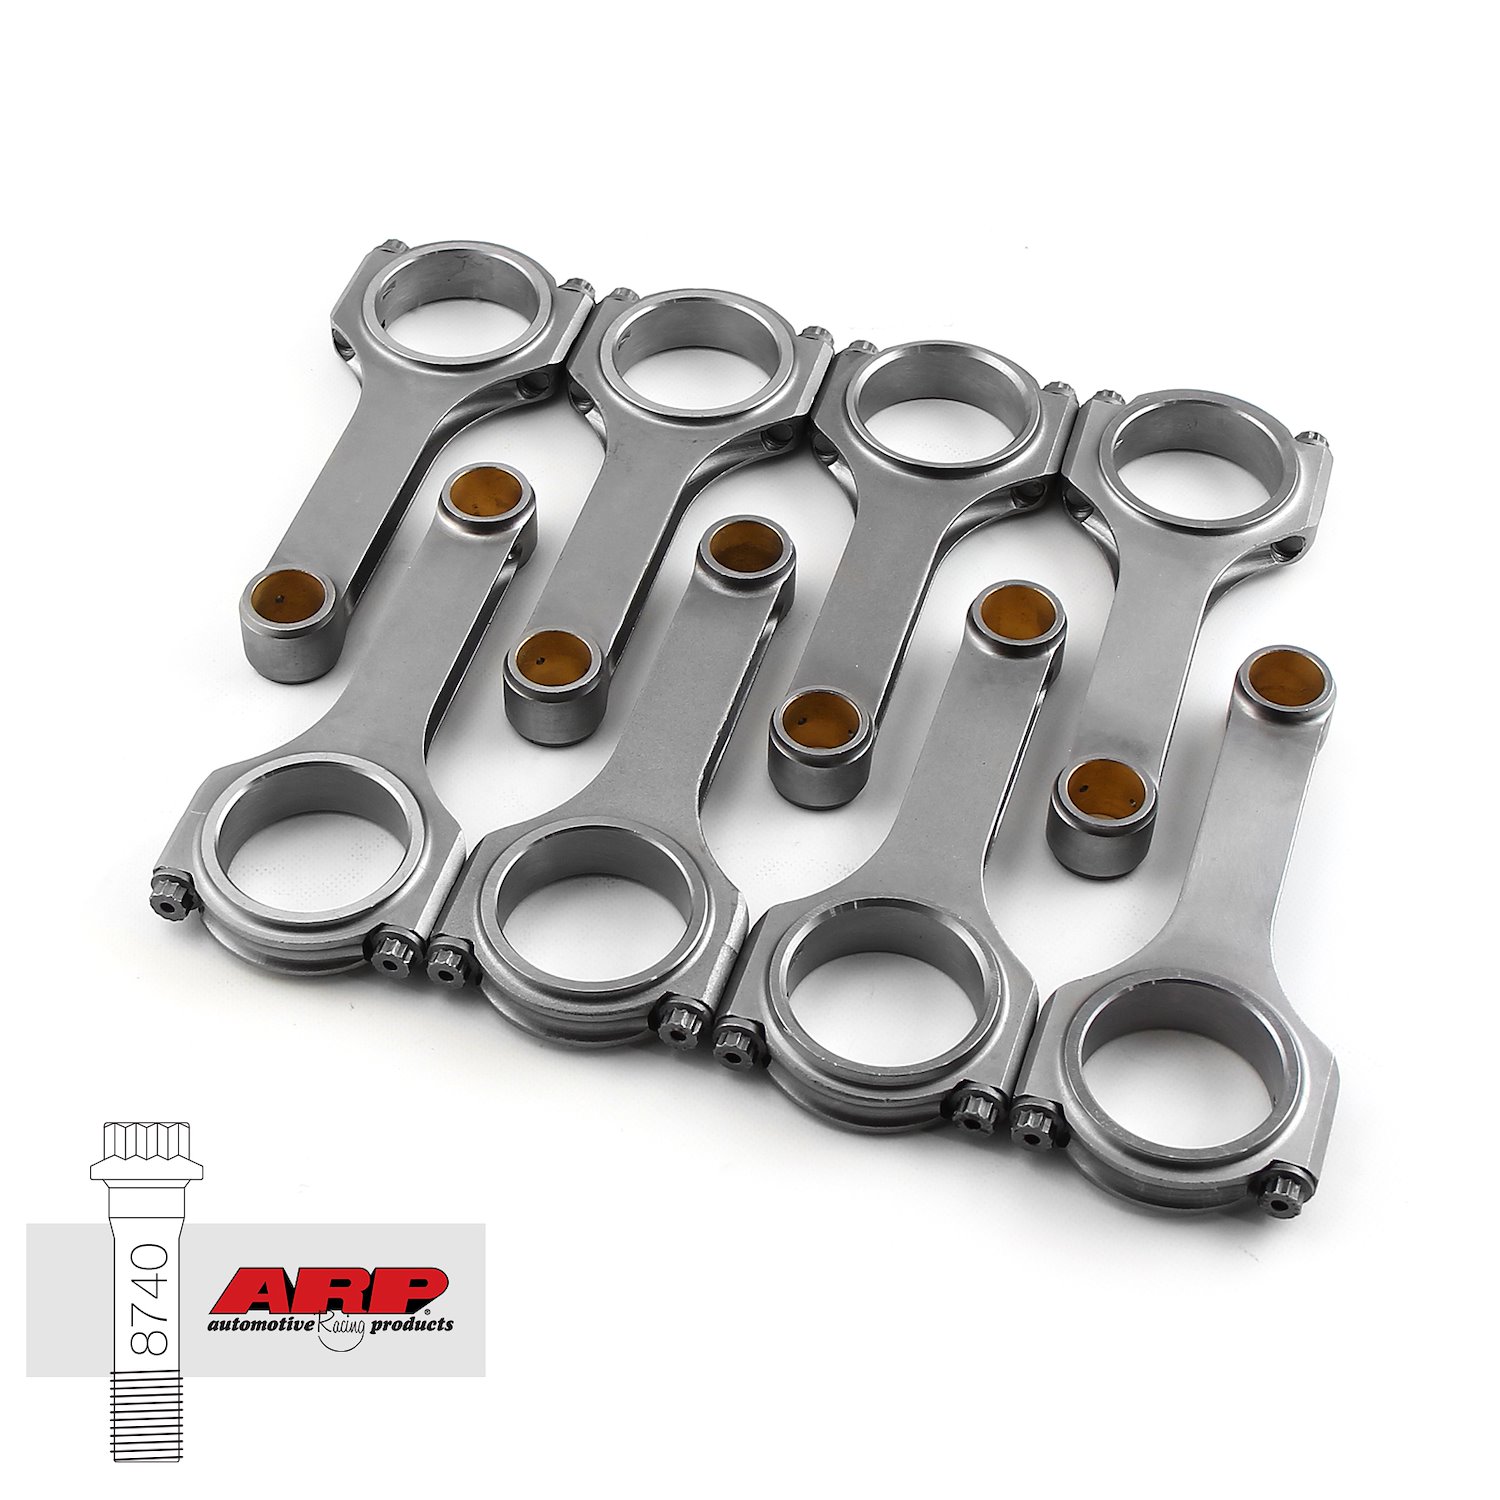 H BEAM 5.933 2.087 .866 4340 CONNECTING RODS